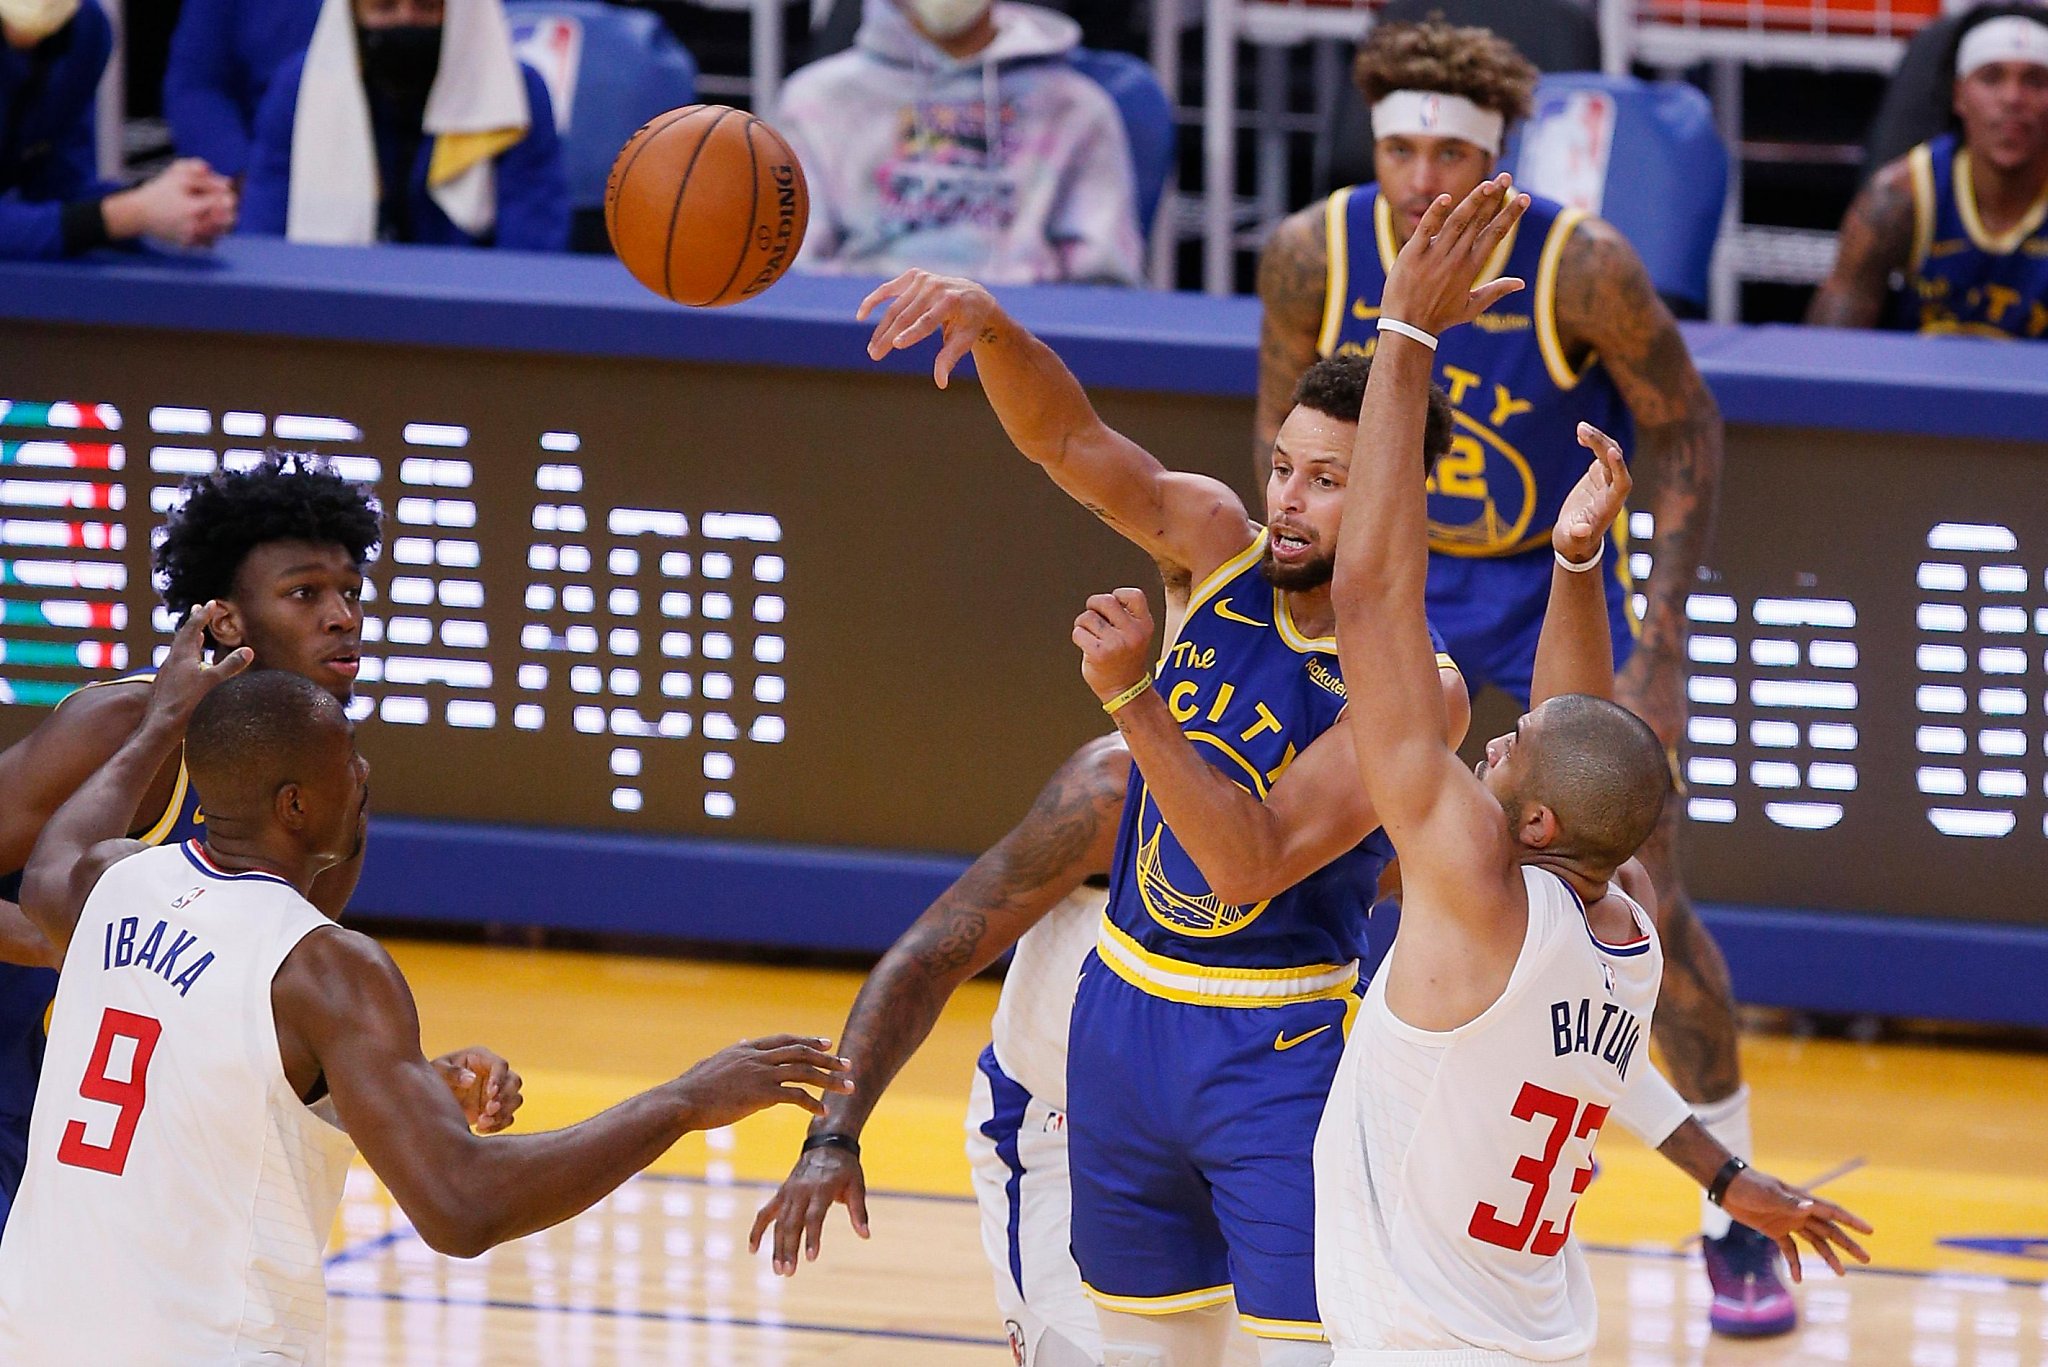 Stephen Curry leads the Warriors back to victory over the Clippers